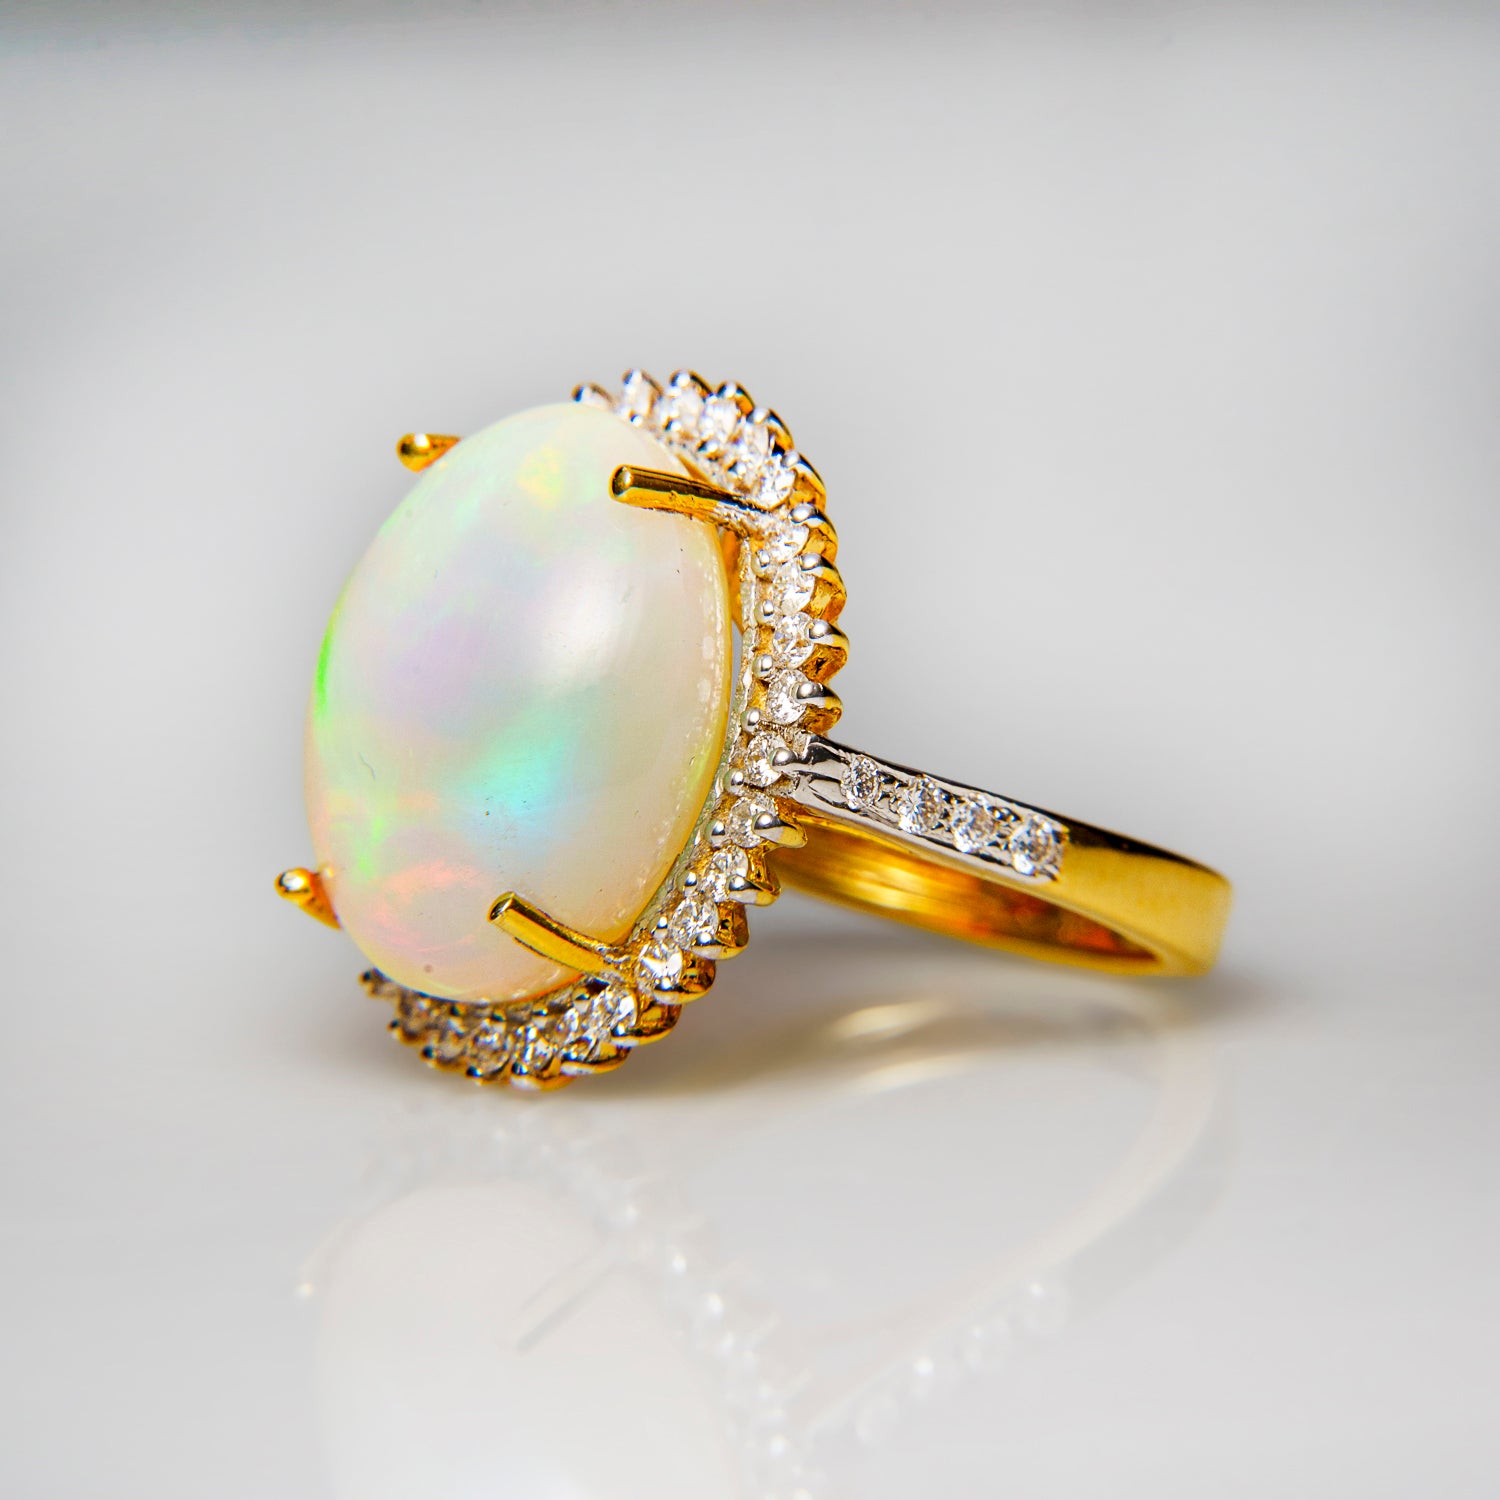 14k Yellow Gold Opal (9.6ct.) Ring